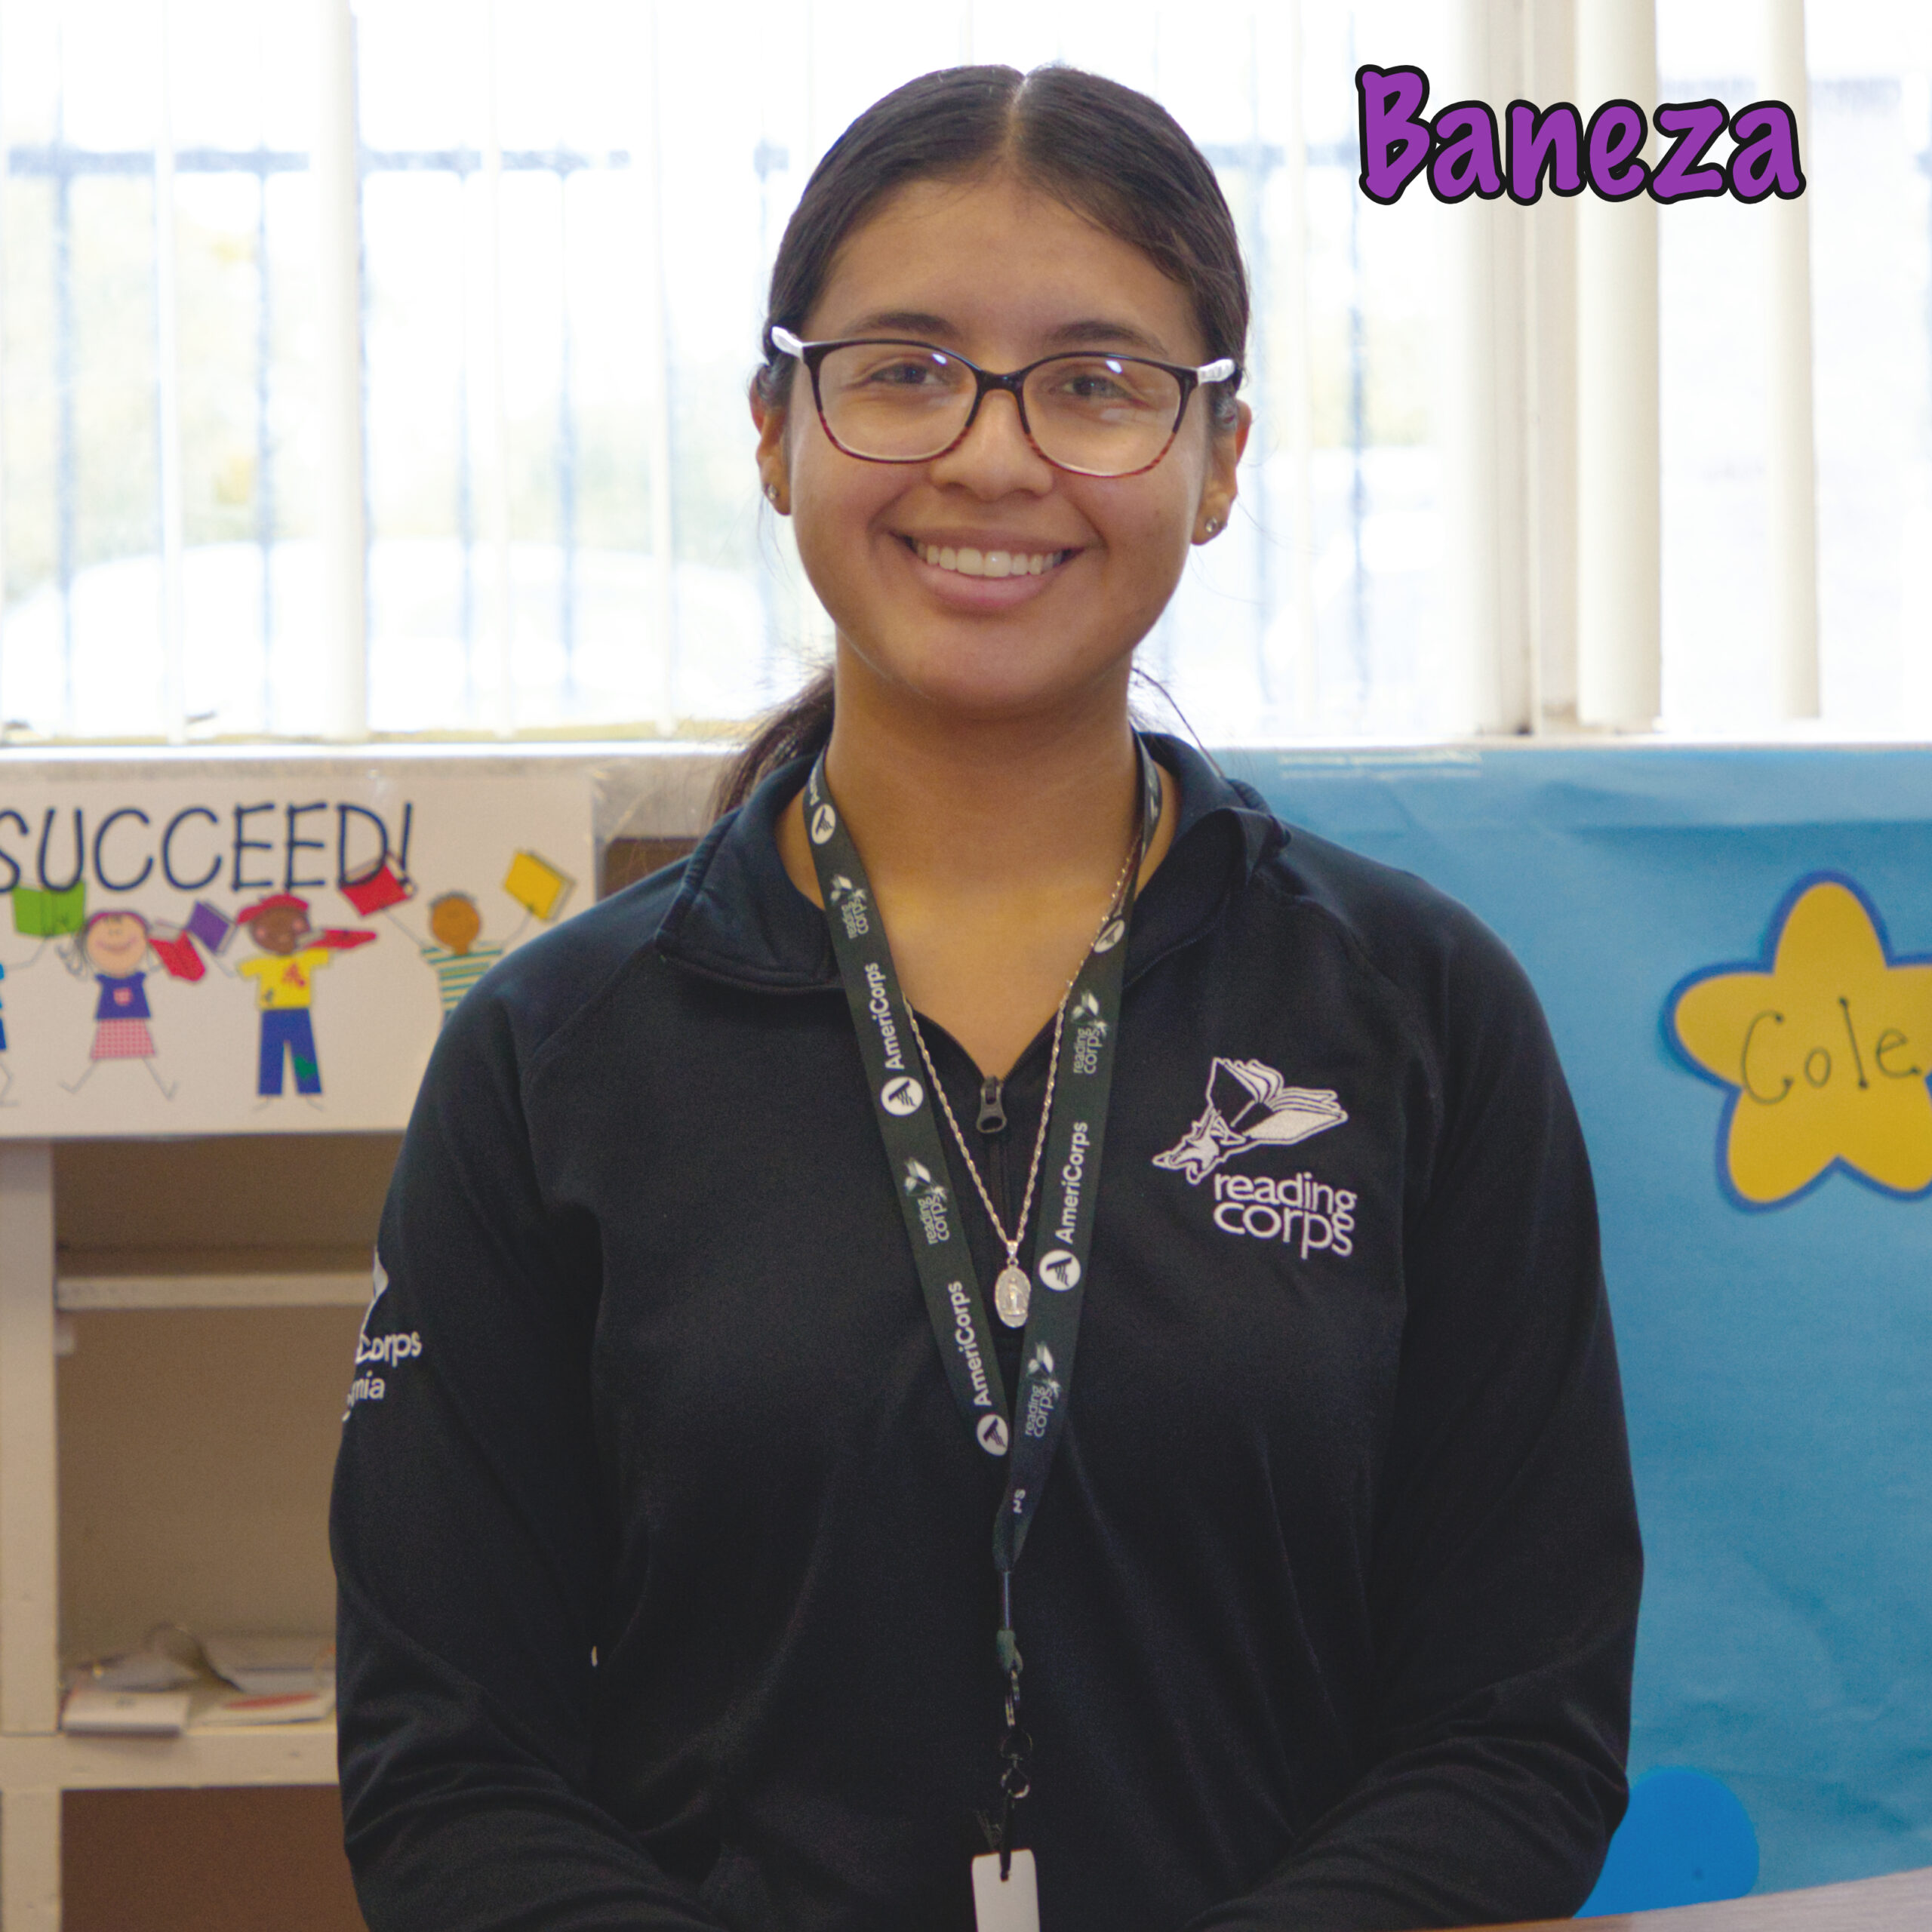 Picture of Reading Corps Teacher Baneza